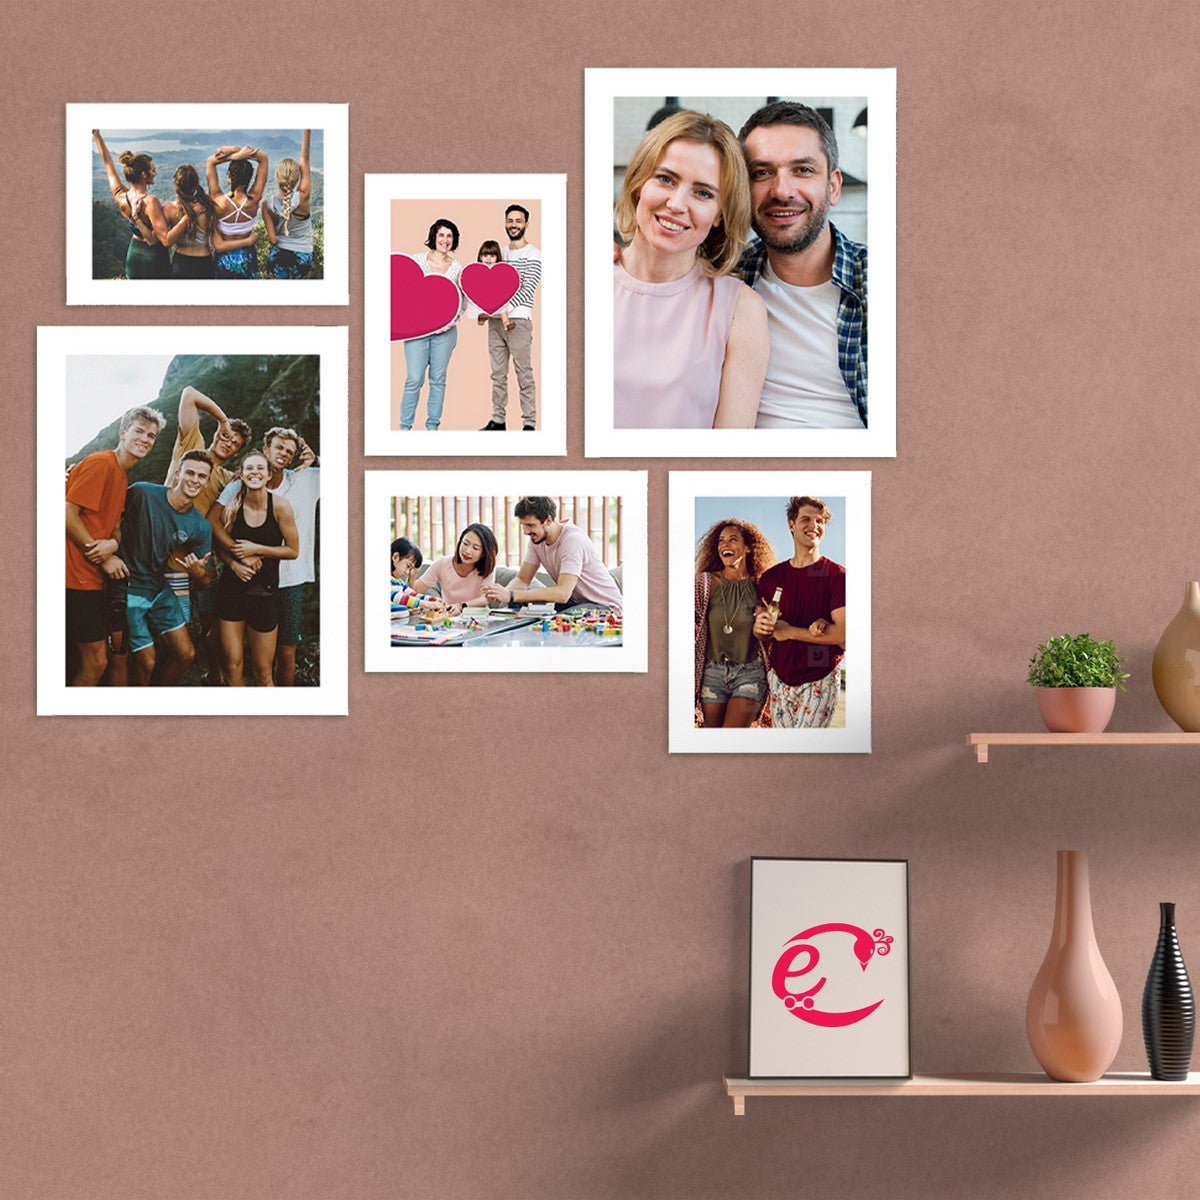 Memory Wall Collage Photo Frame - Set of 6 Photo Frames for 4 Photos of 5"x7", 2 Photos of 8"x10" 1